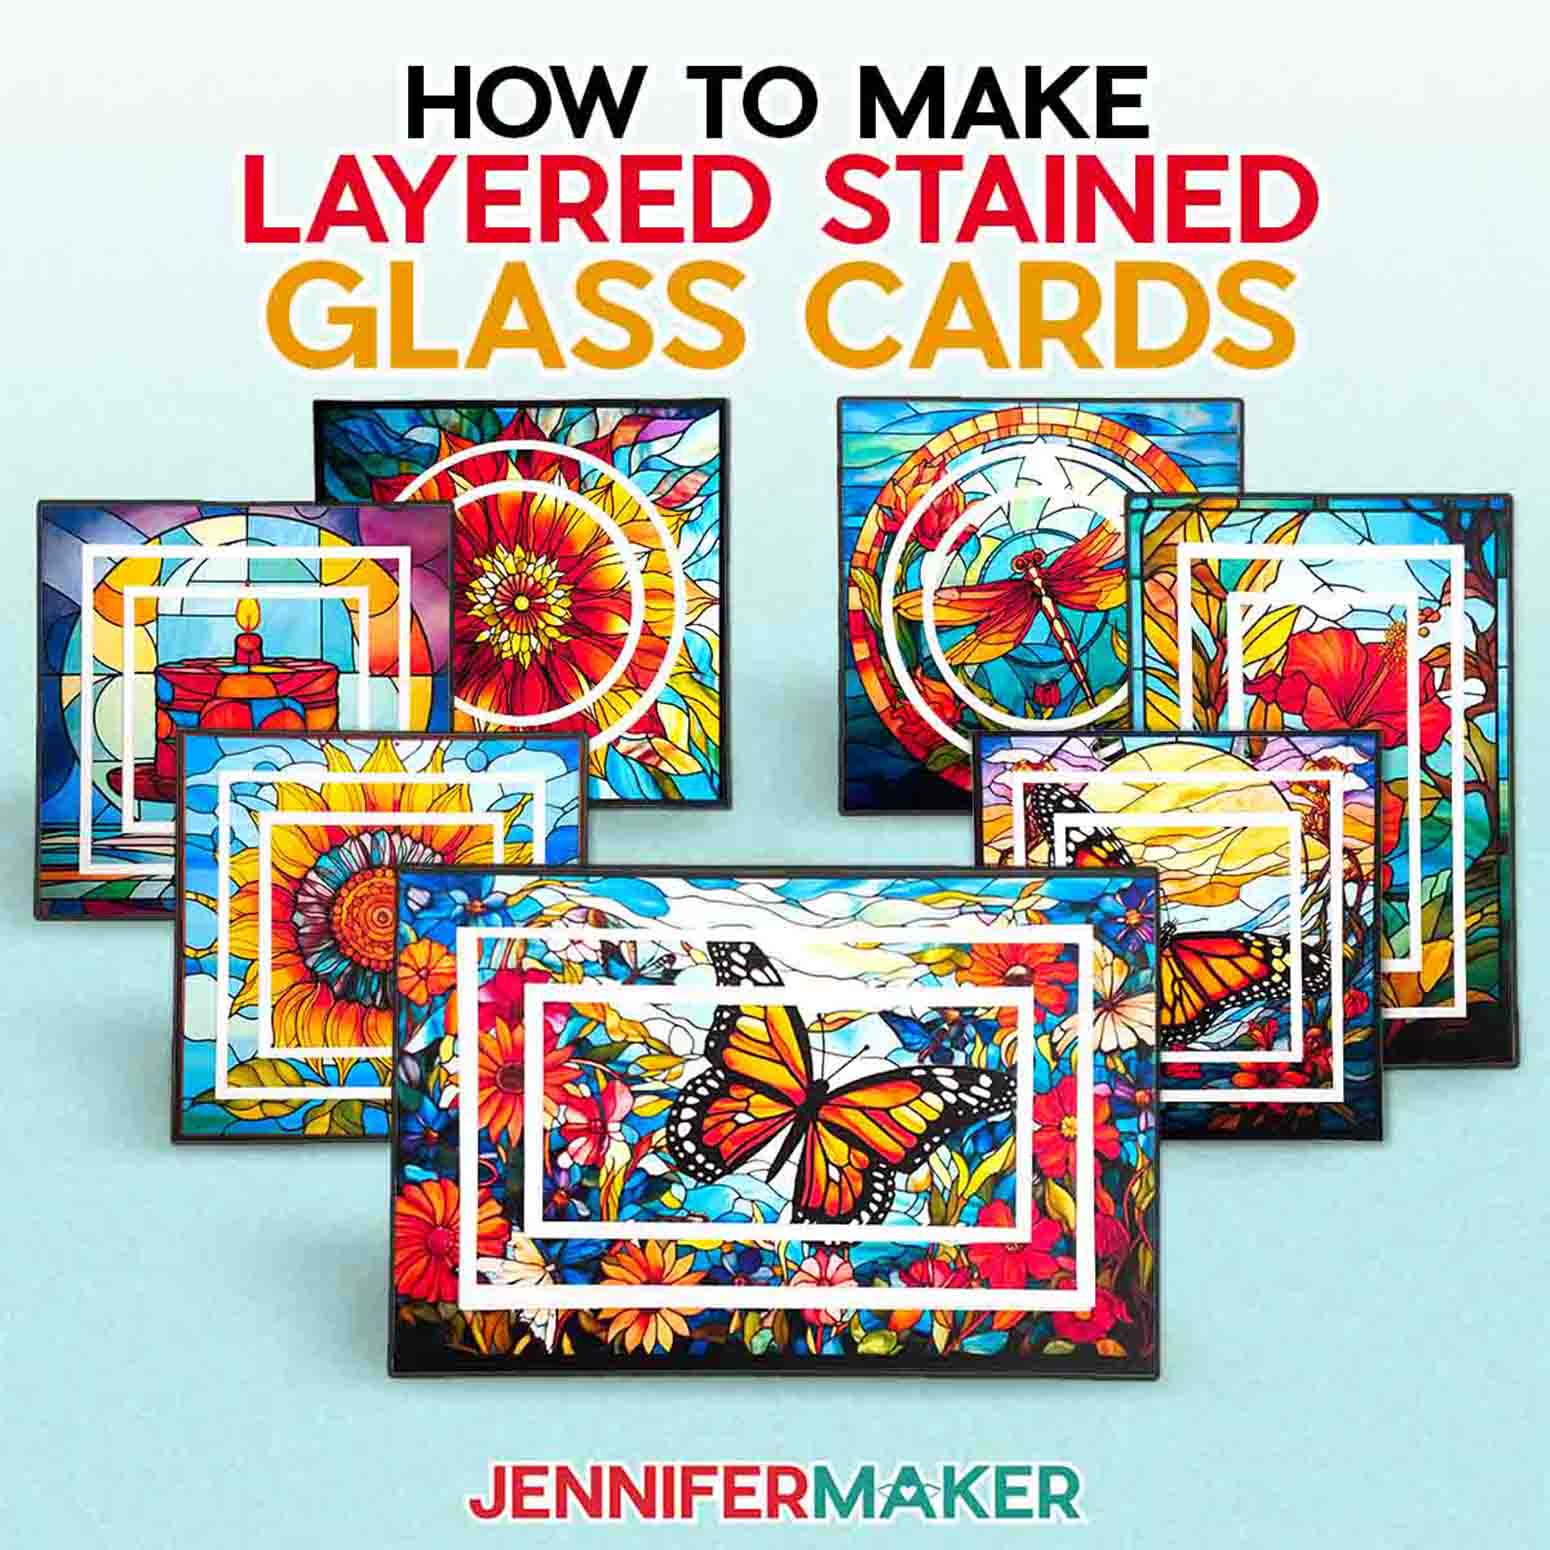 Stained Glass Cards with Layered Window Effect!